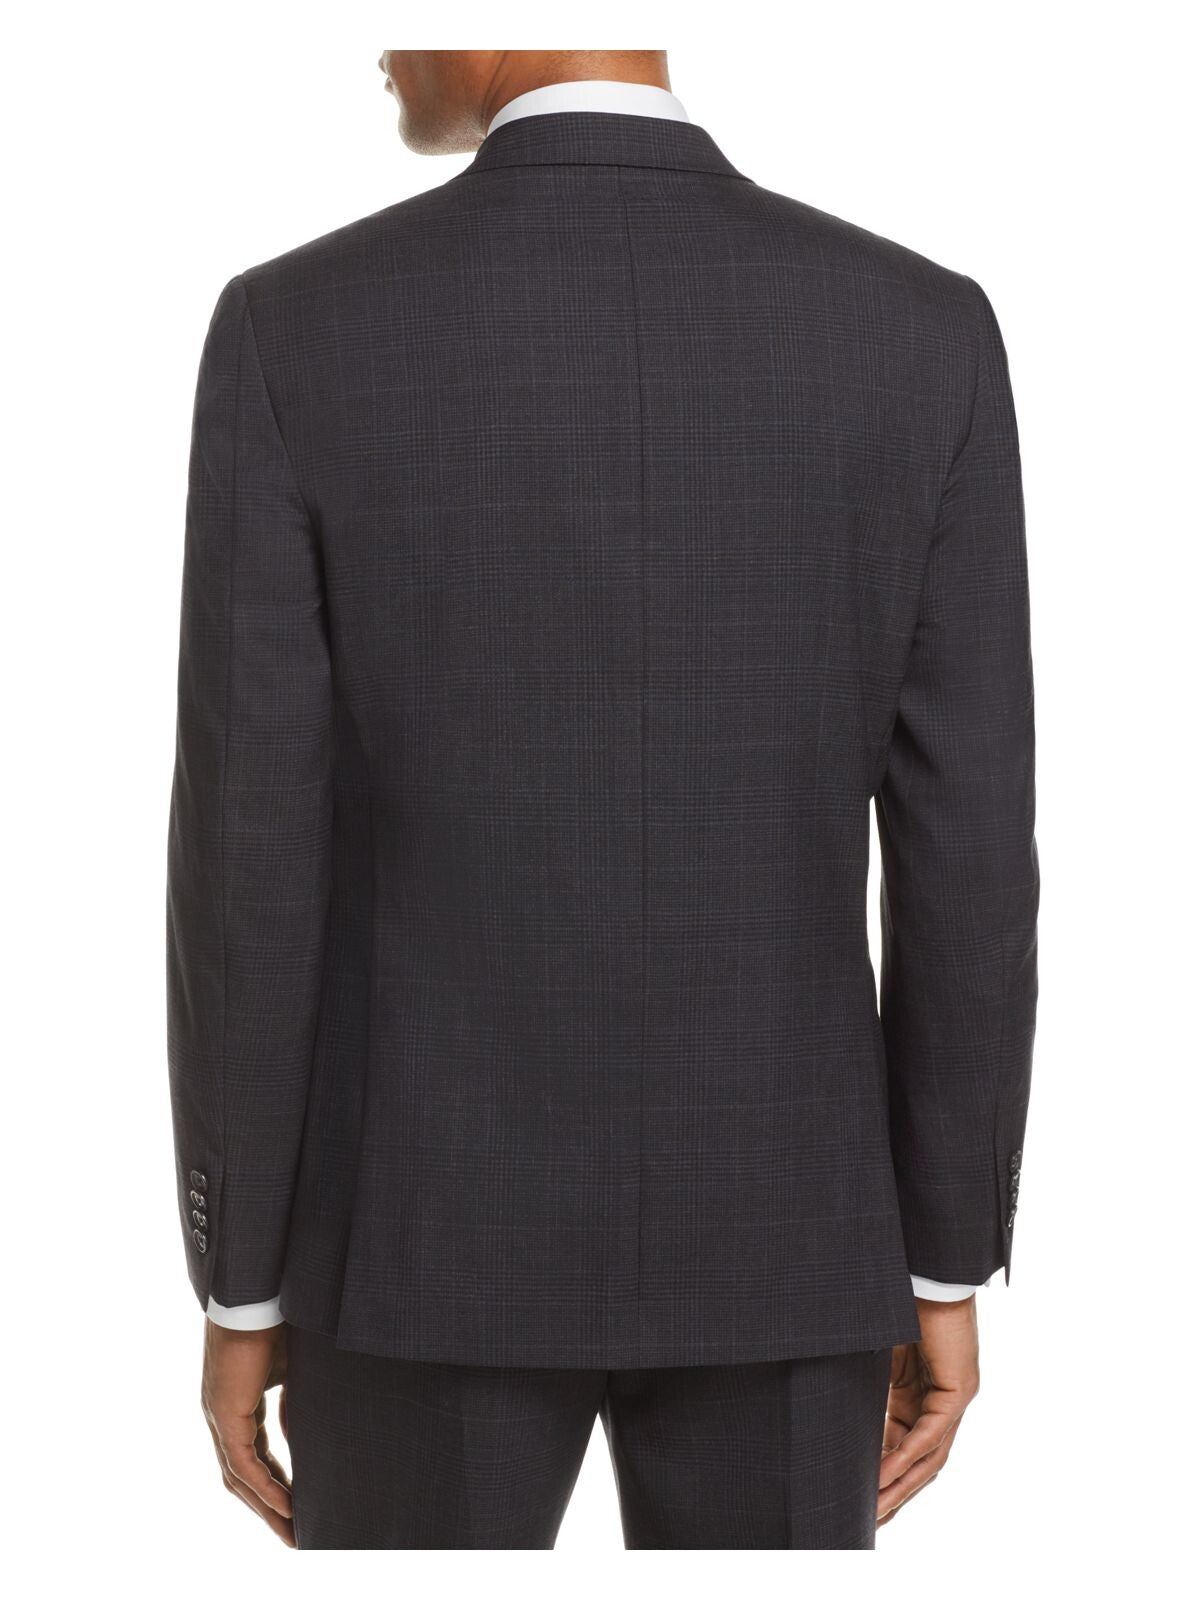 MICHAEL KORS Mens Gray Single Breasted, Stretch, Windowpane Plaid Classic Fit Stretch Suit Separate Blazer Jacket 40R